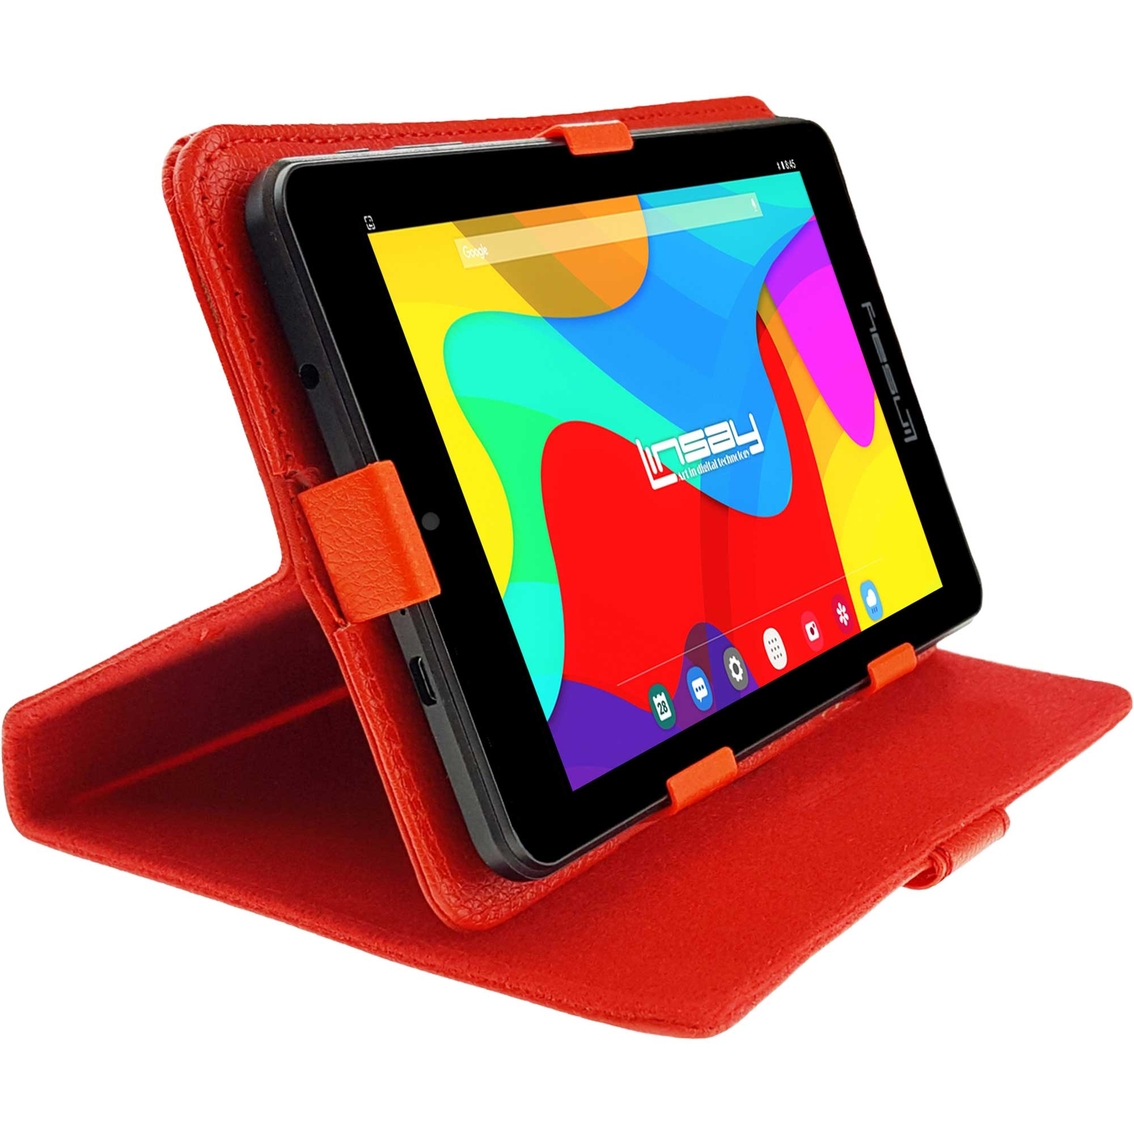 Linsay 7 in. 2GB RAM 32GB Tablet with Case, Holder and Pen - Image 2 of 3